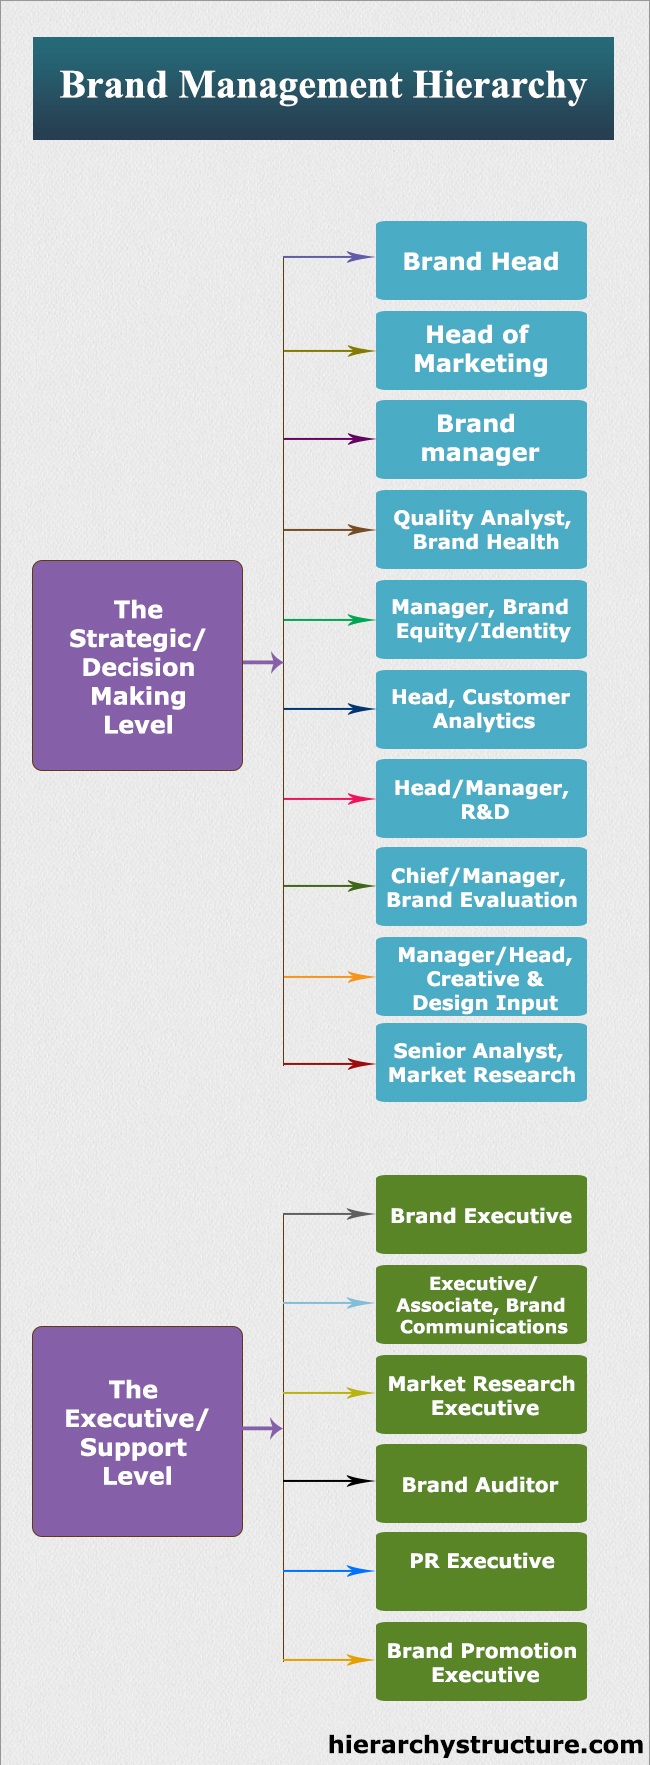 Brand Management Hierarchy